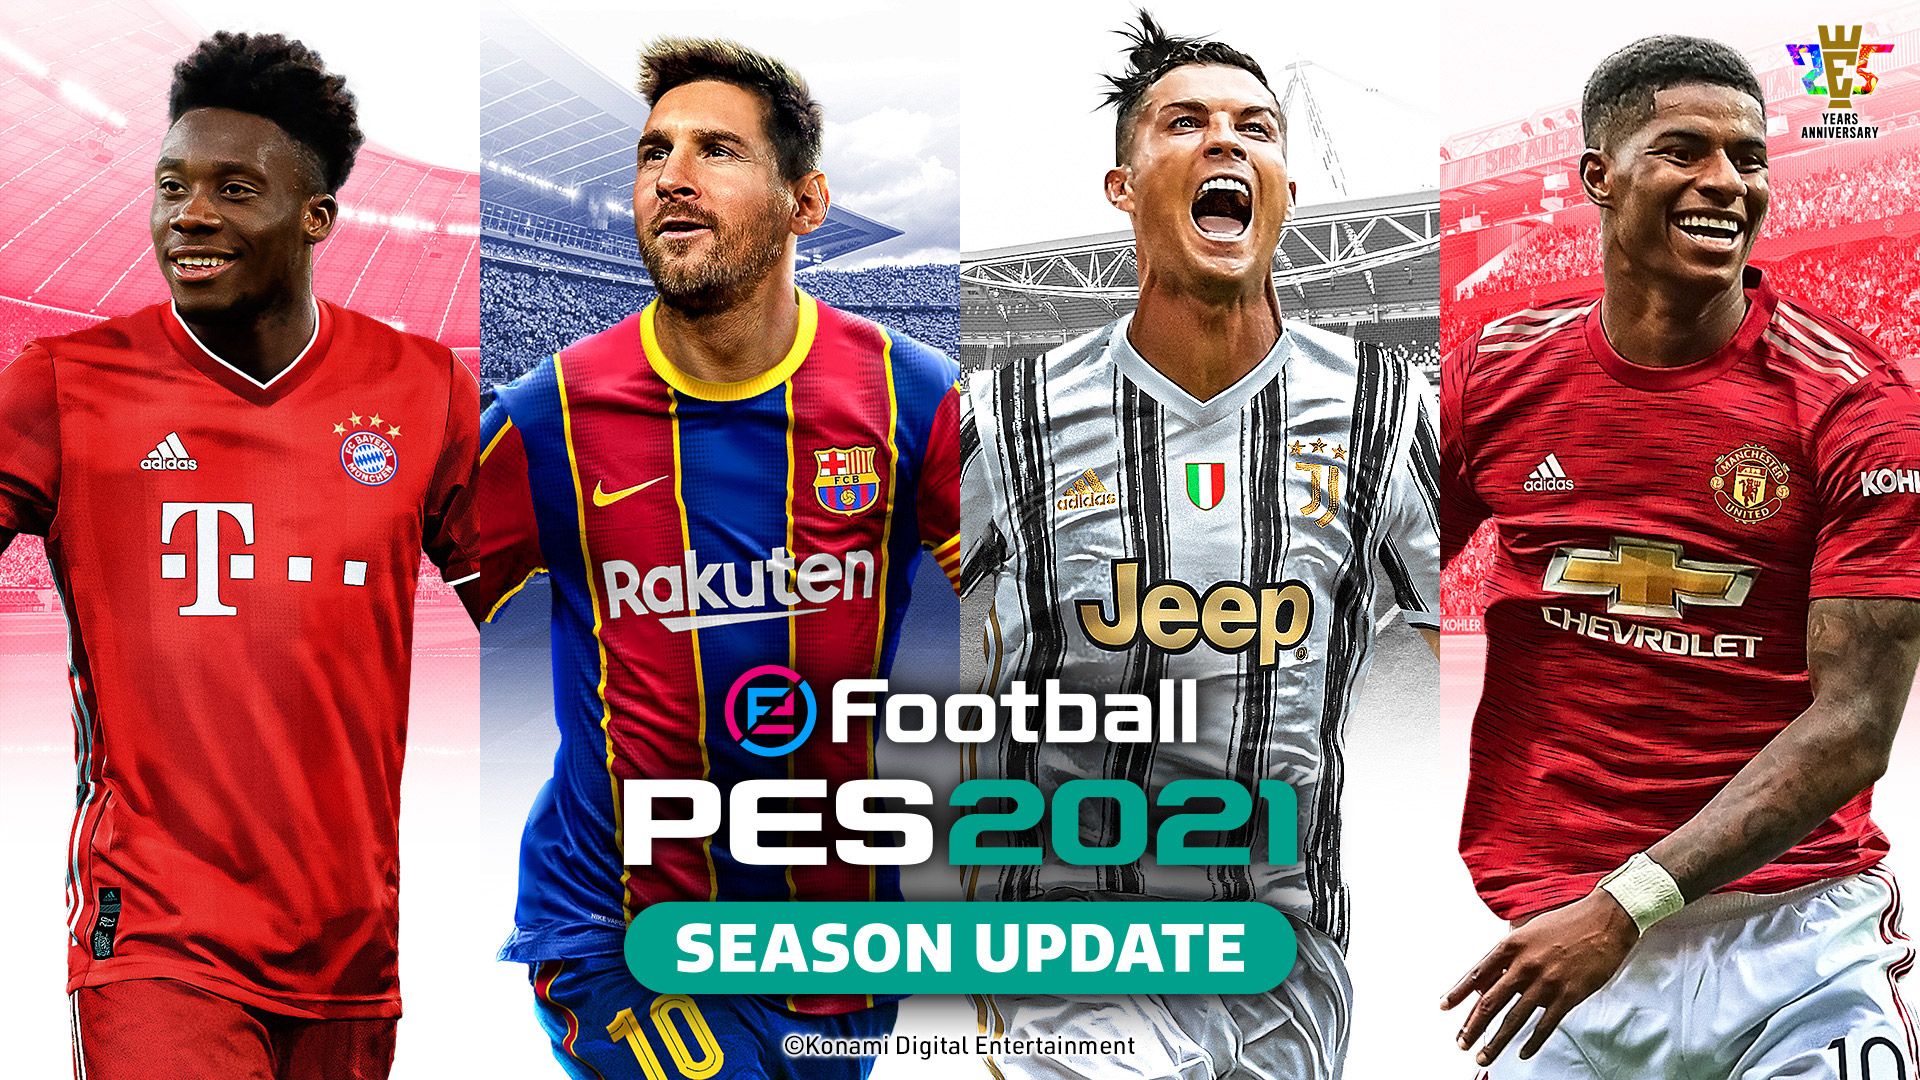 download free efootball ™ 2022